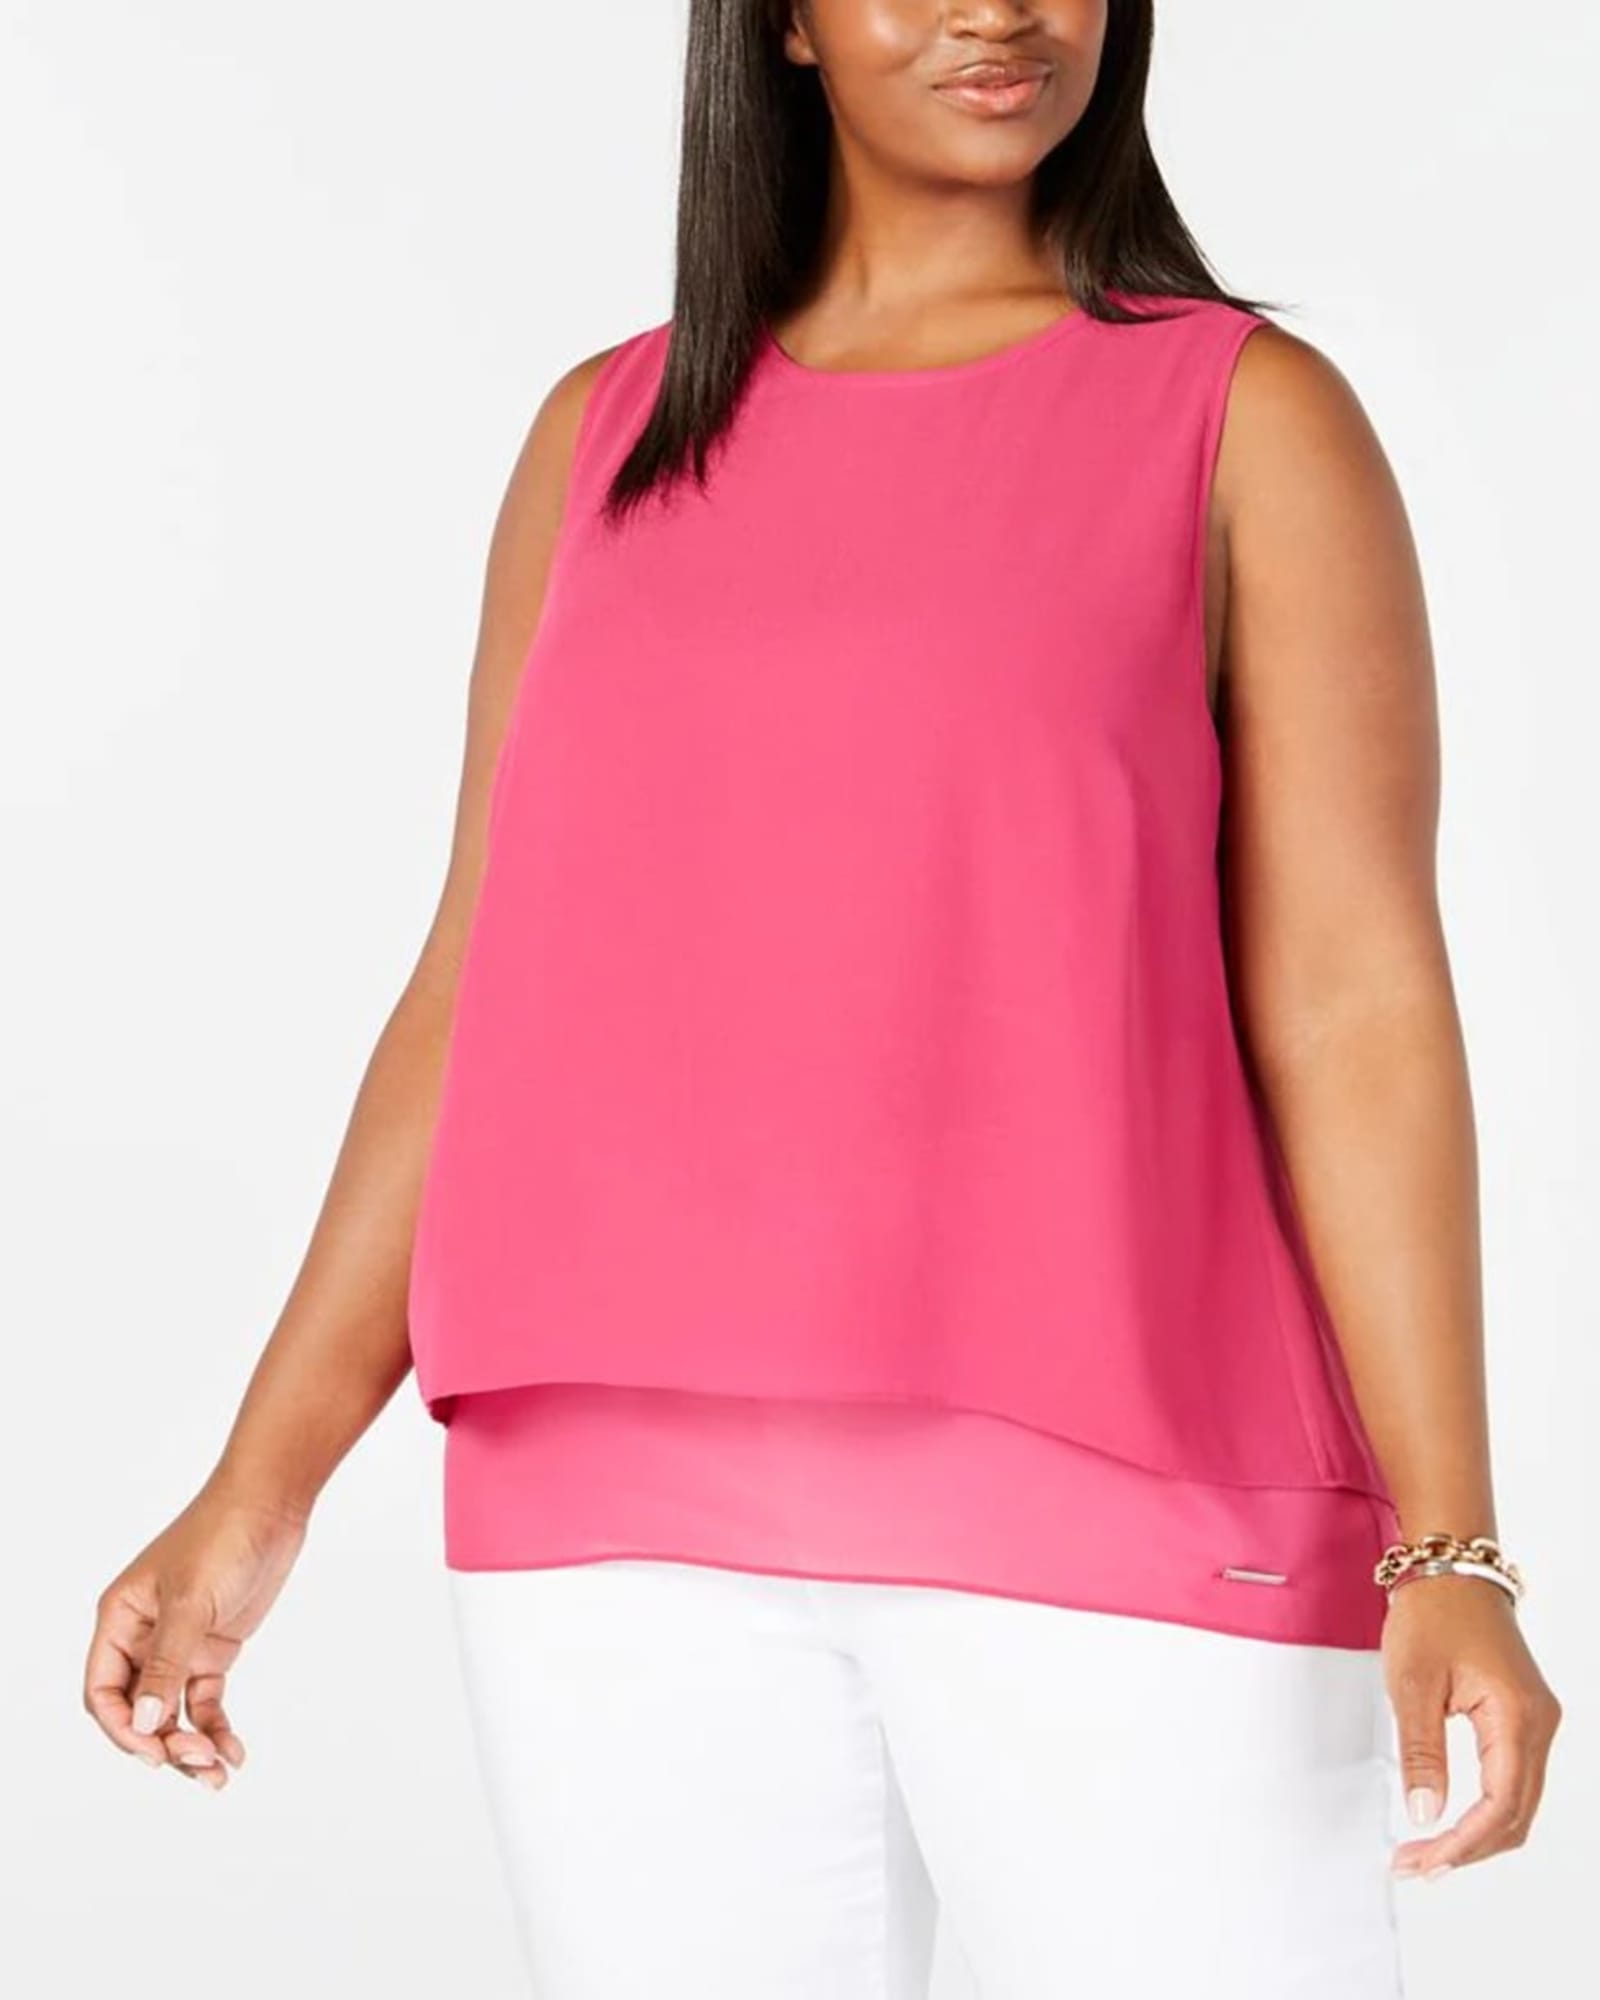 Plus Size Polyester Tops